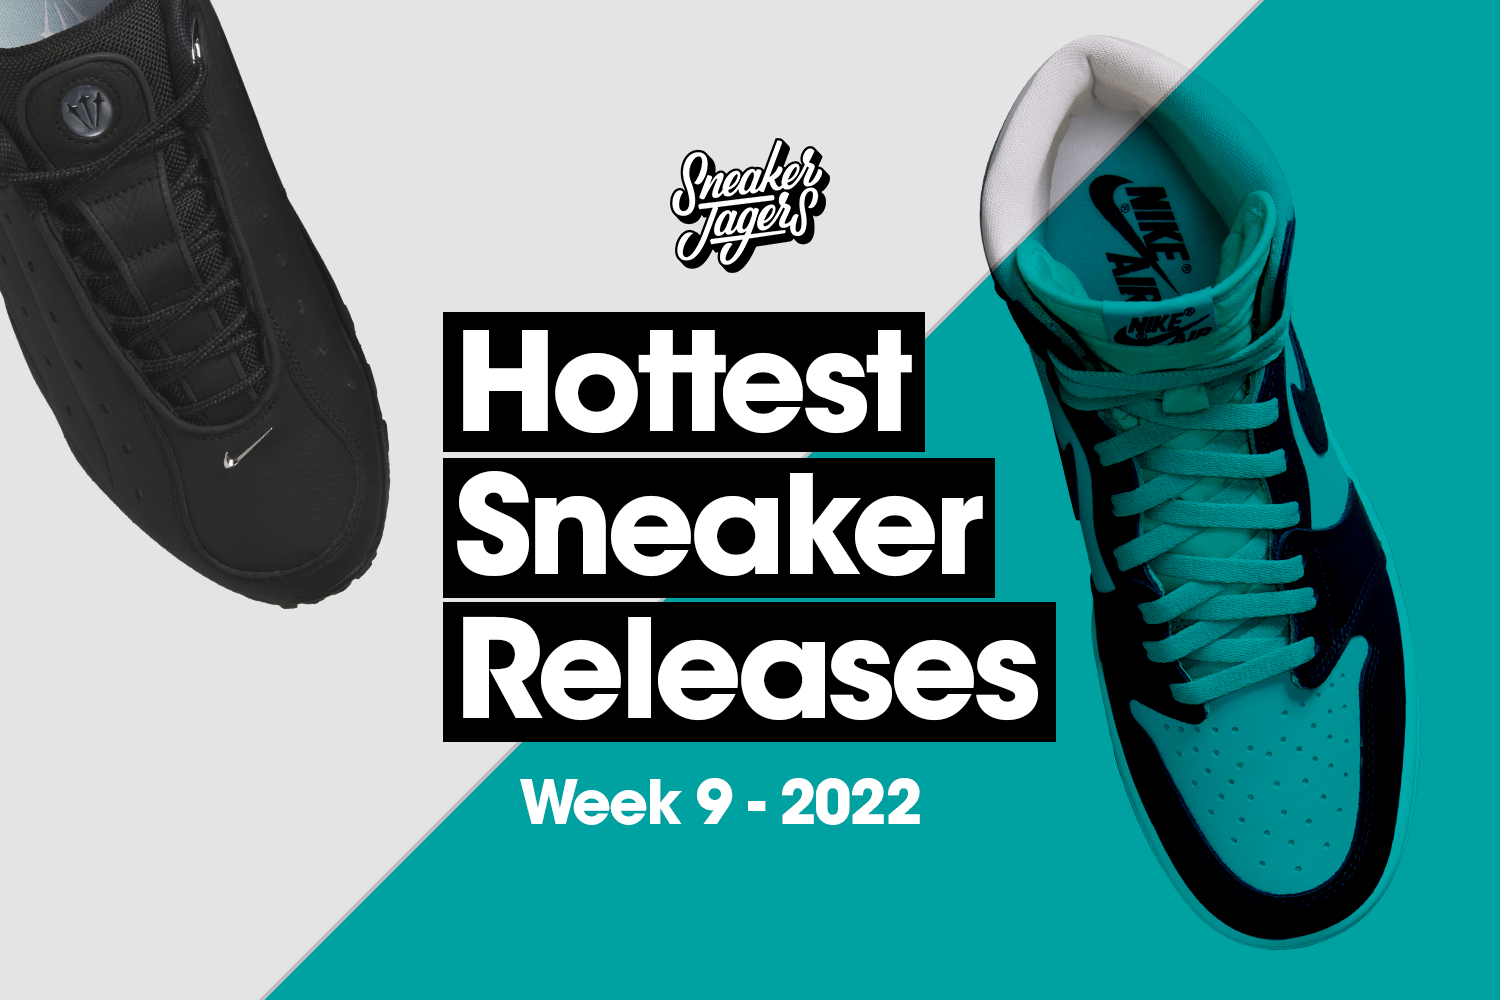 Hottest Sneaker Releases - Wk 9